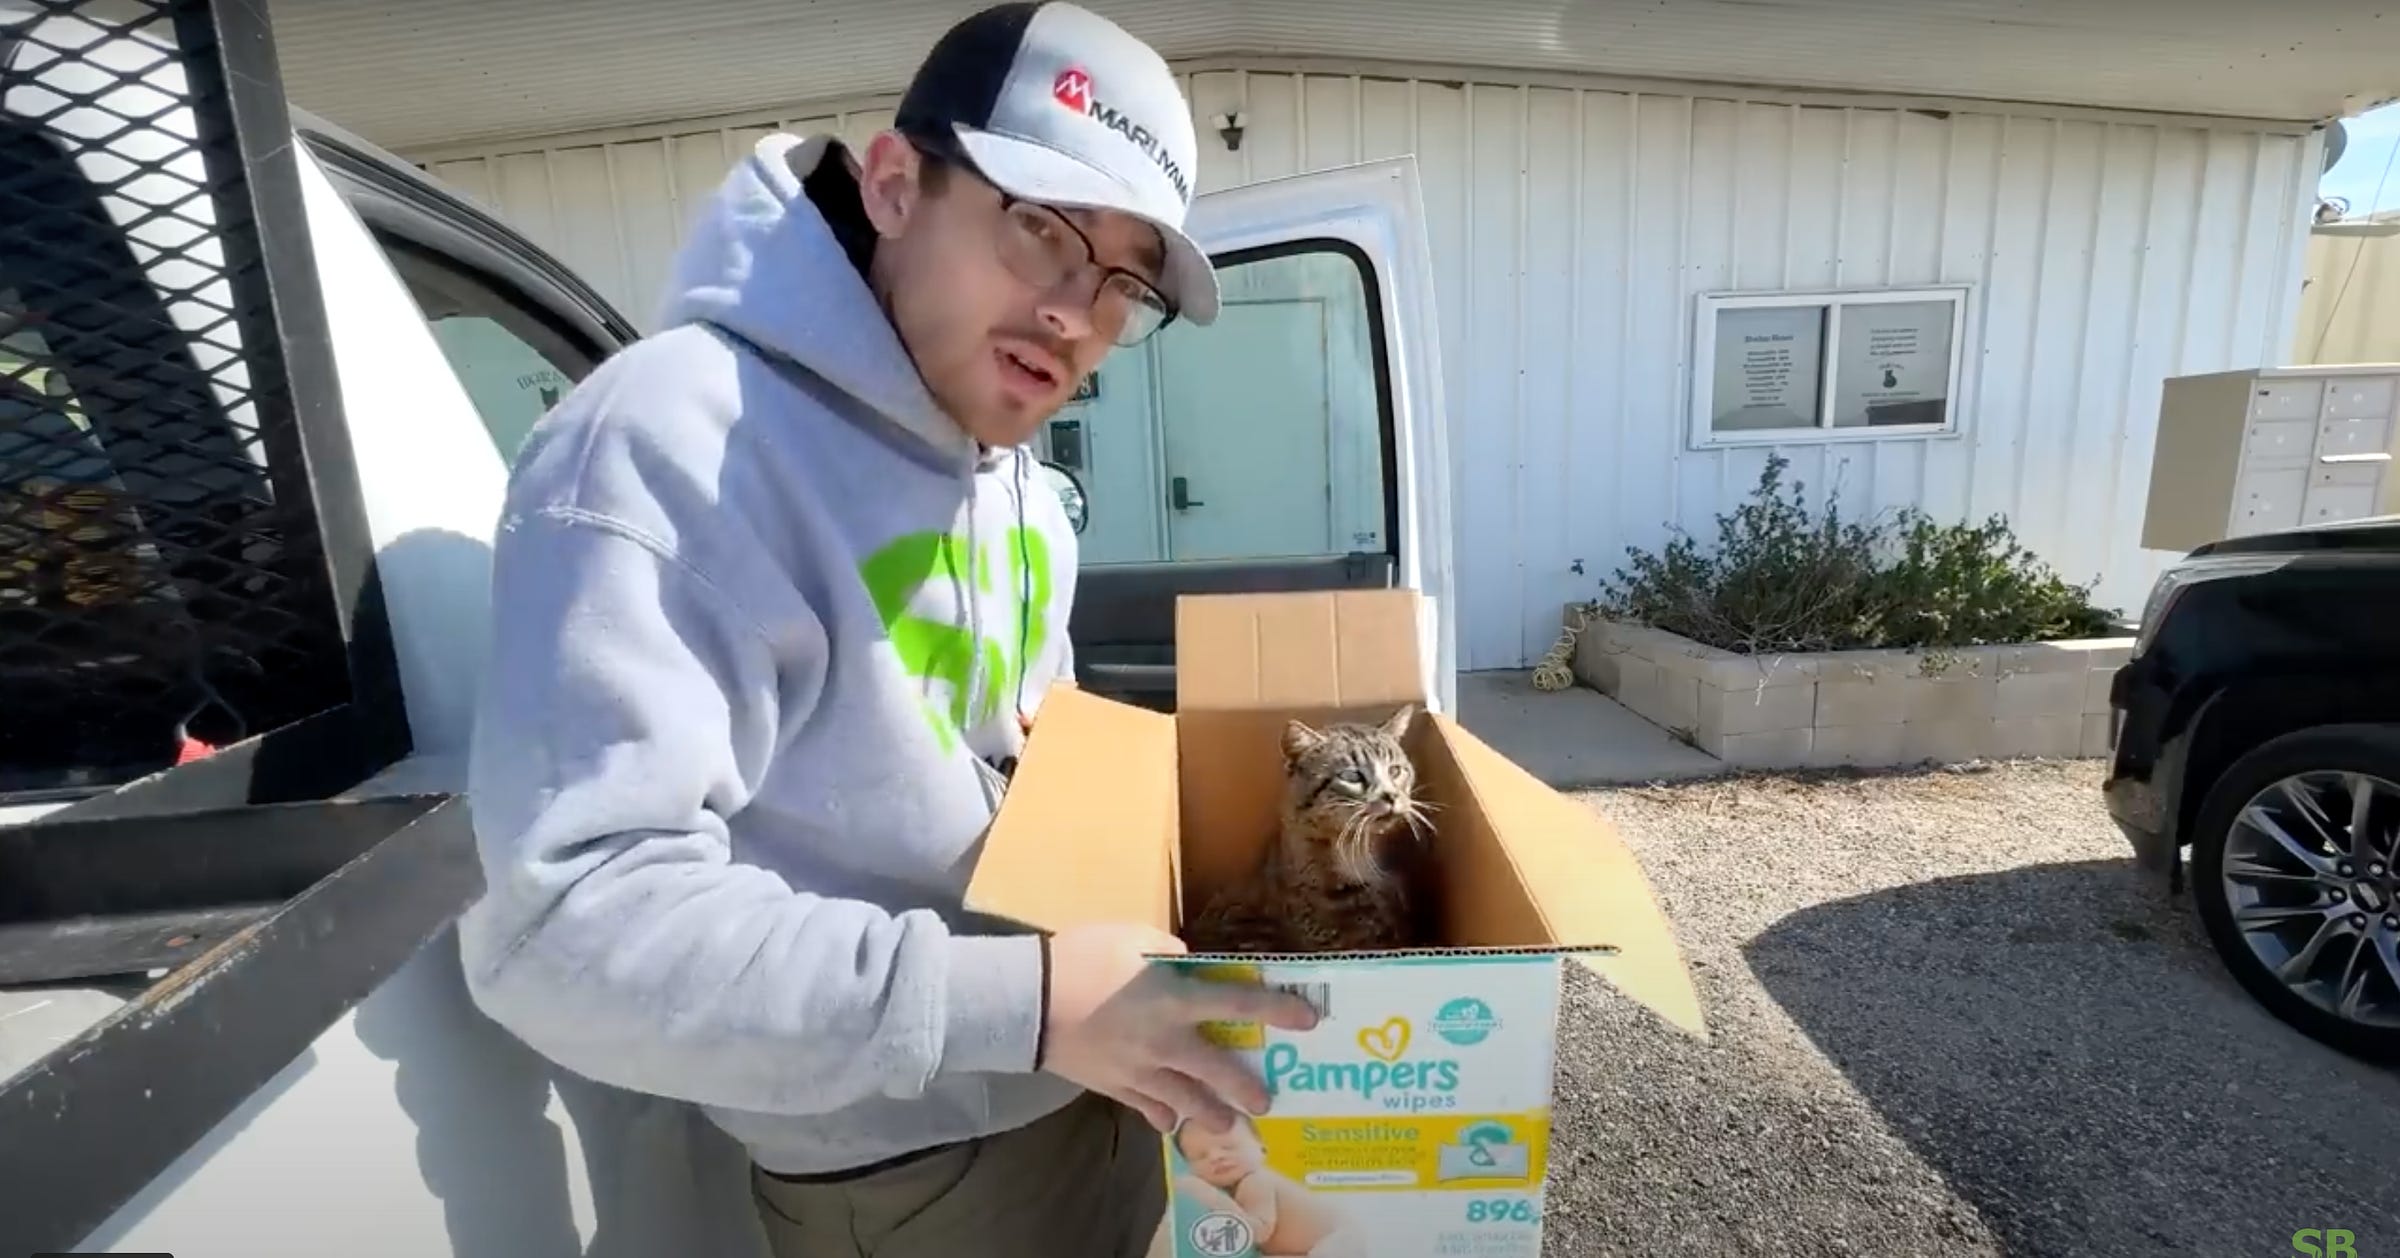 Spencer B. of SB Mowing stands in front of Edgar & Ivy's Cat Sanctuary holding a cat in a box in his hands.